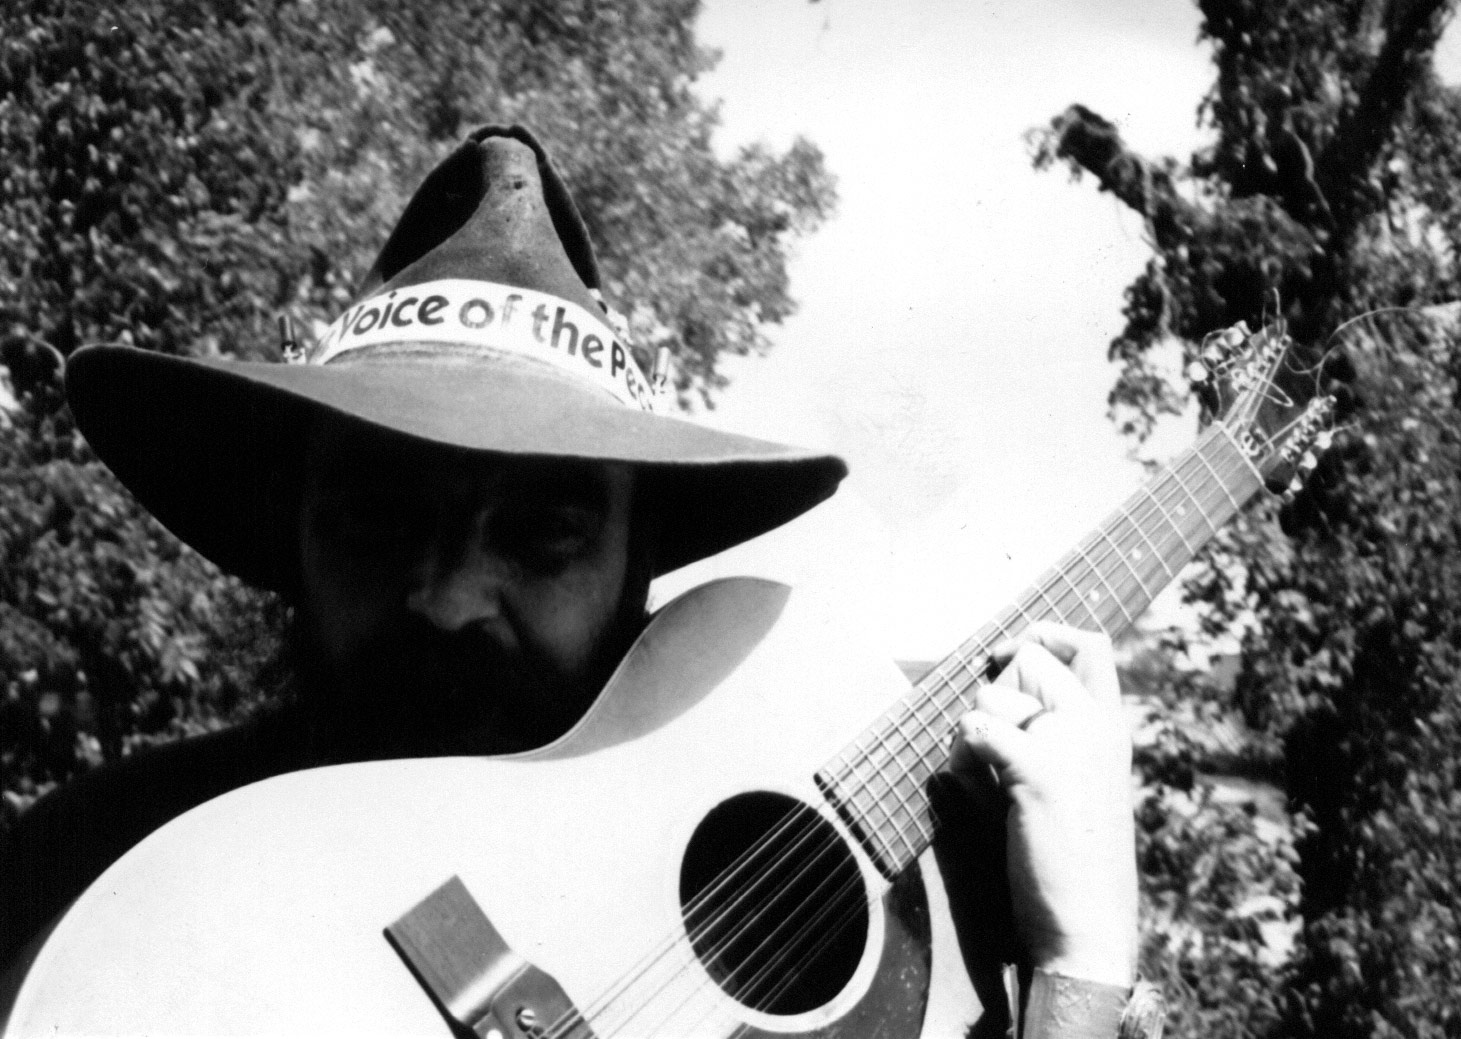 Blaze in cowboy hat, "Voice of the People" hatband, holding a twelve string guitar